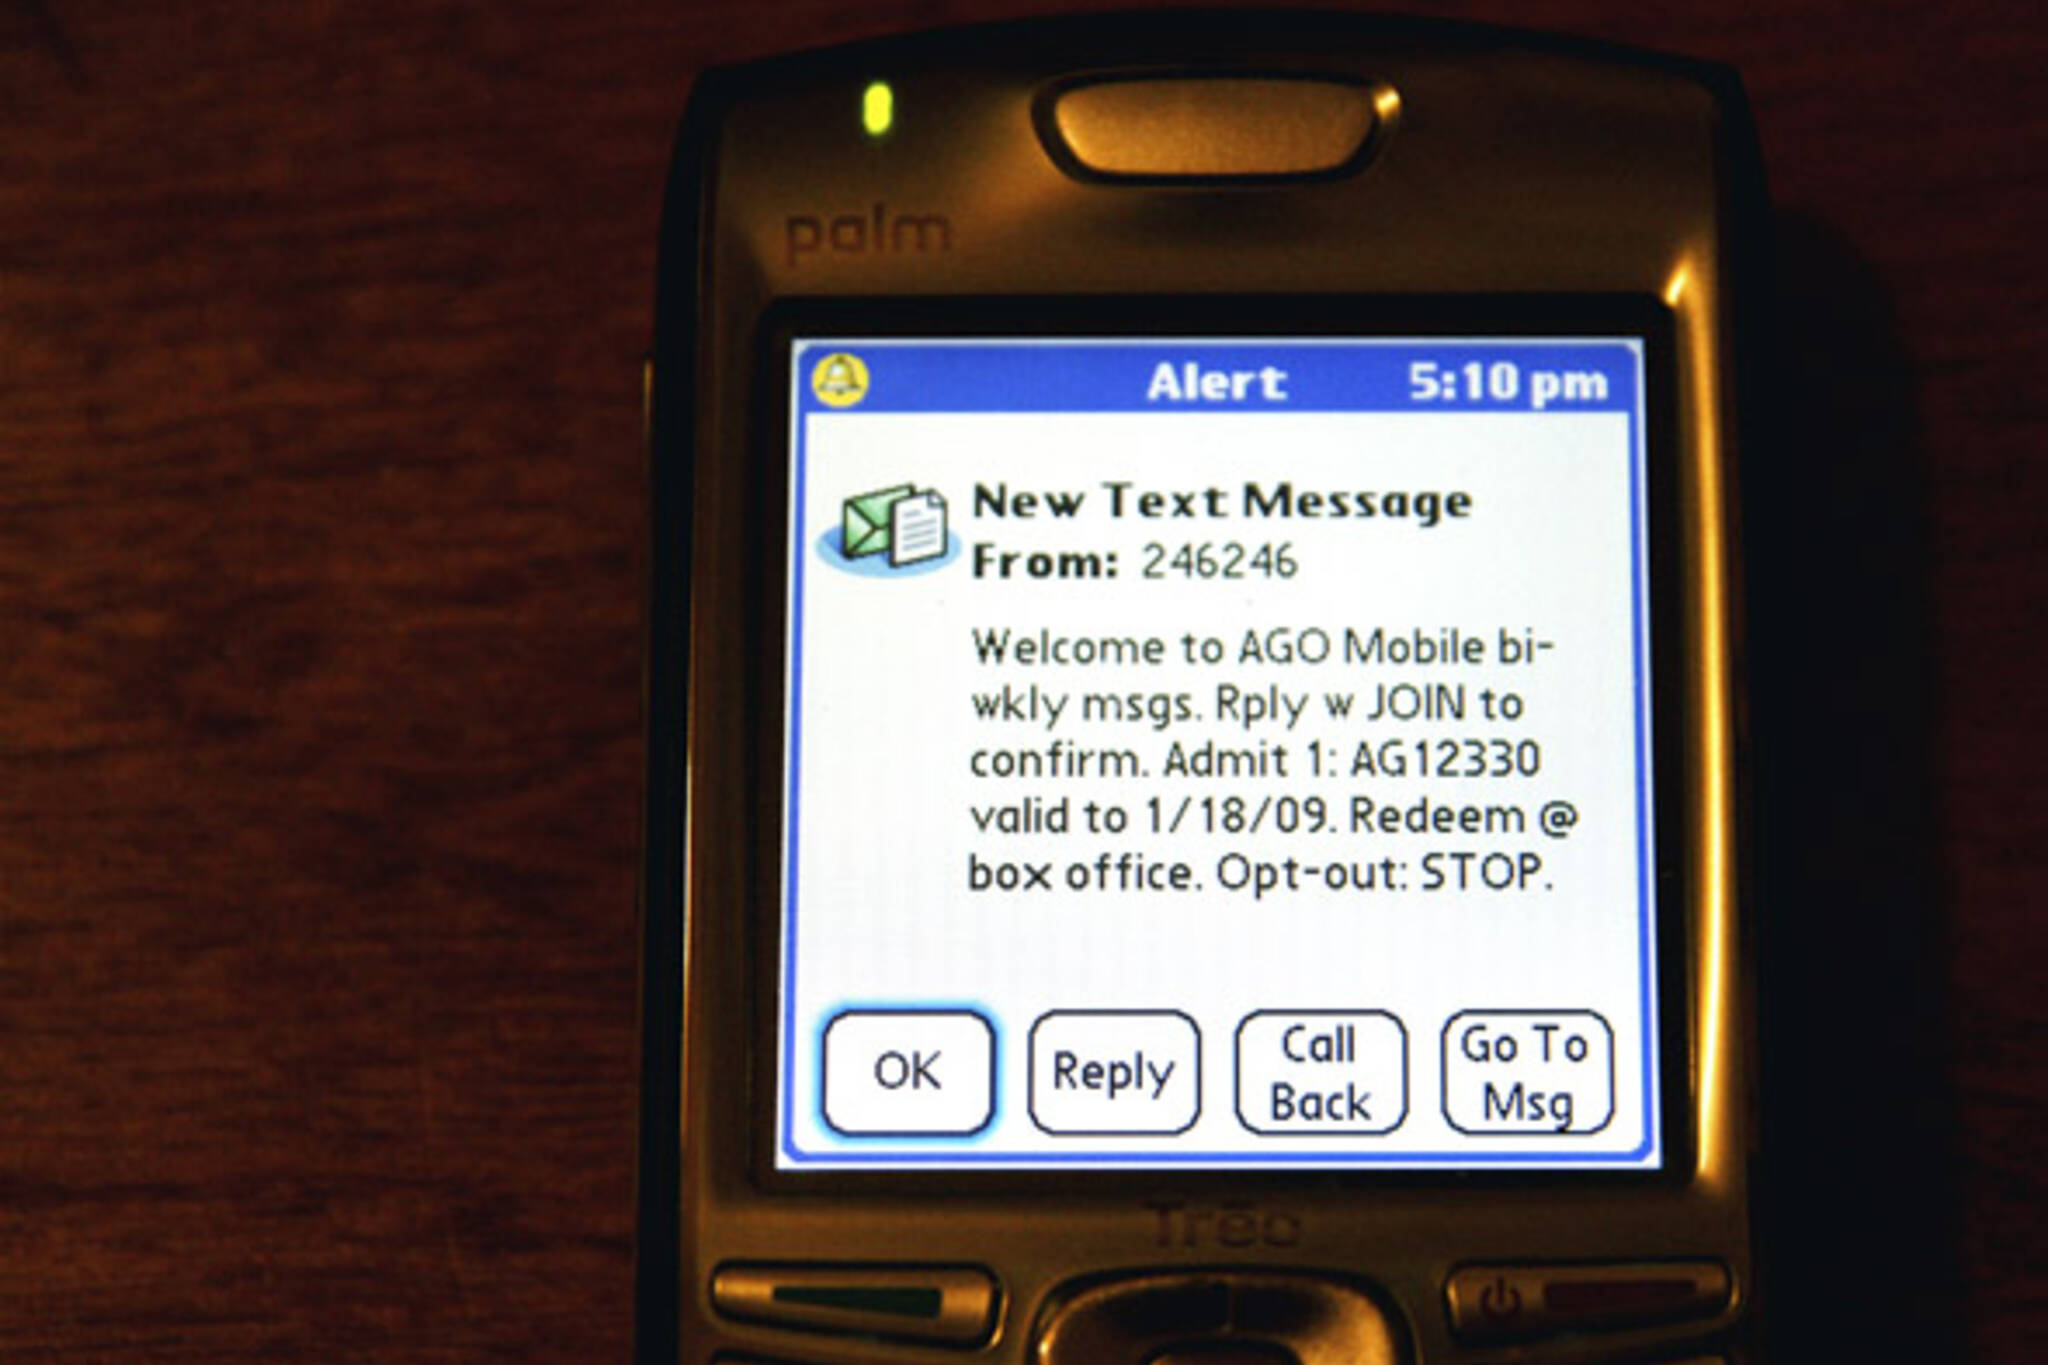 AGO offers free admission via text messaging